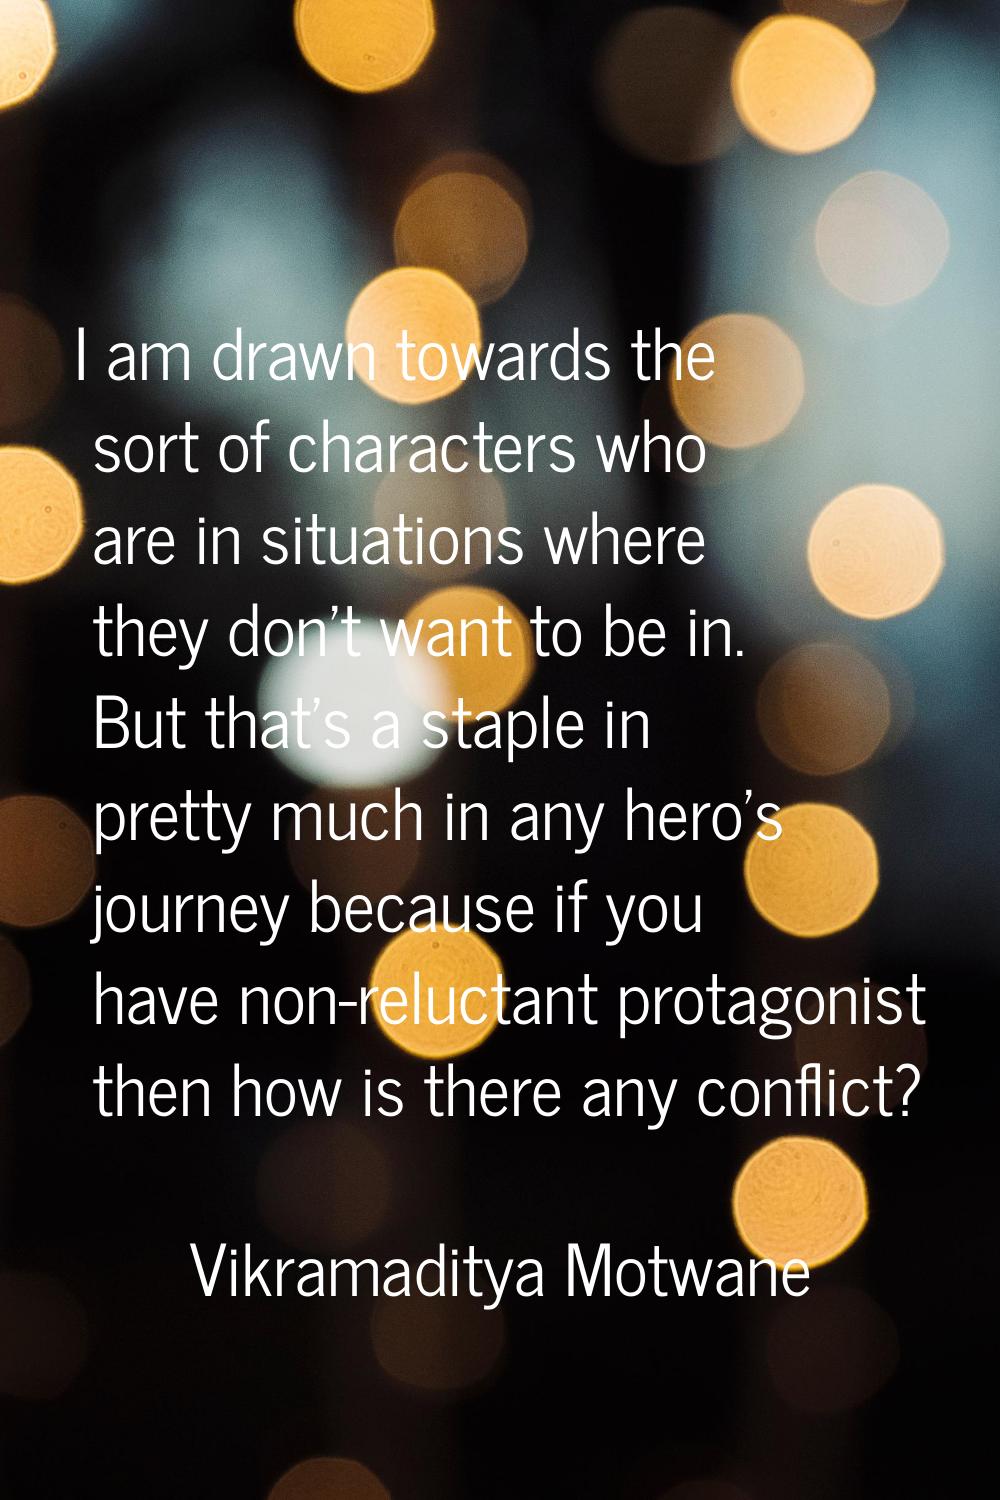 I am drawn towards the sort of characters who are in situations where they don't want to be in. But